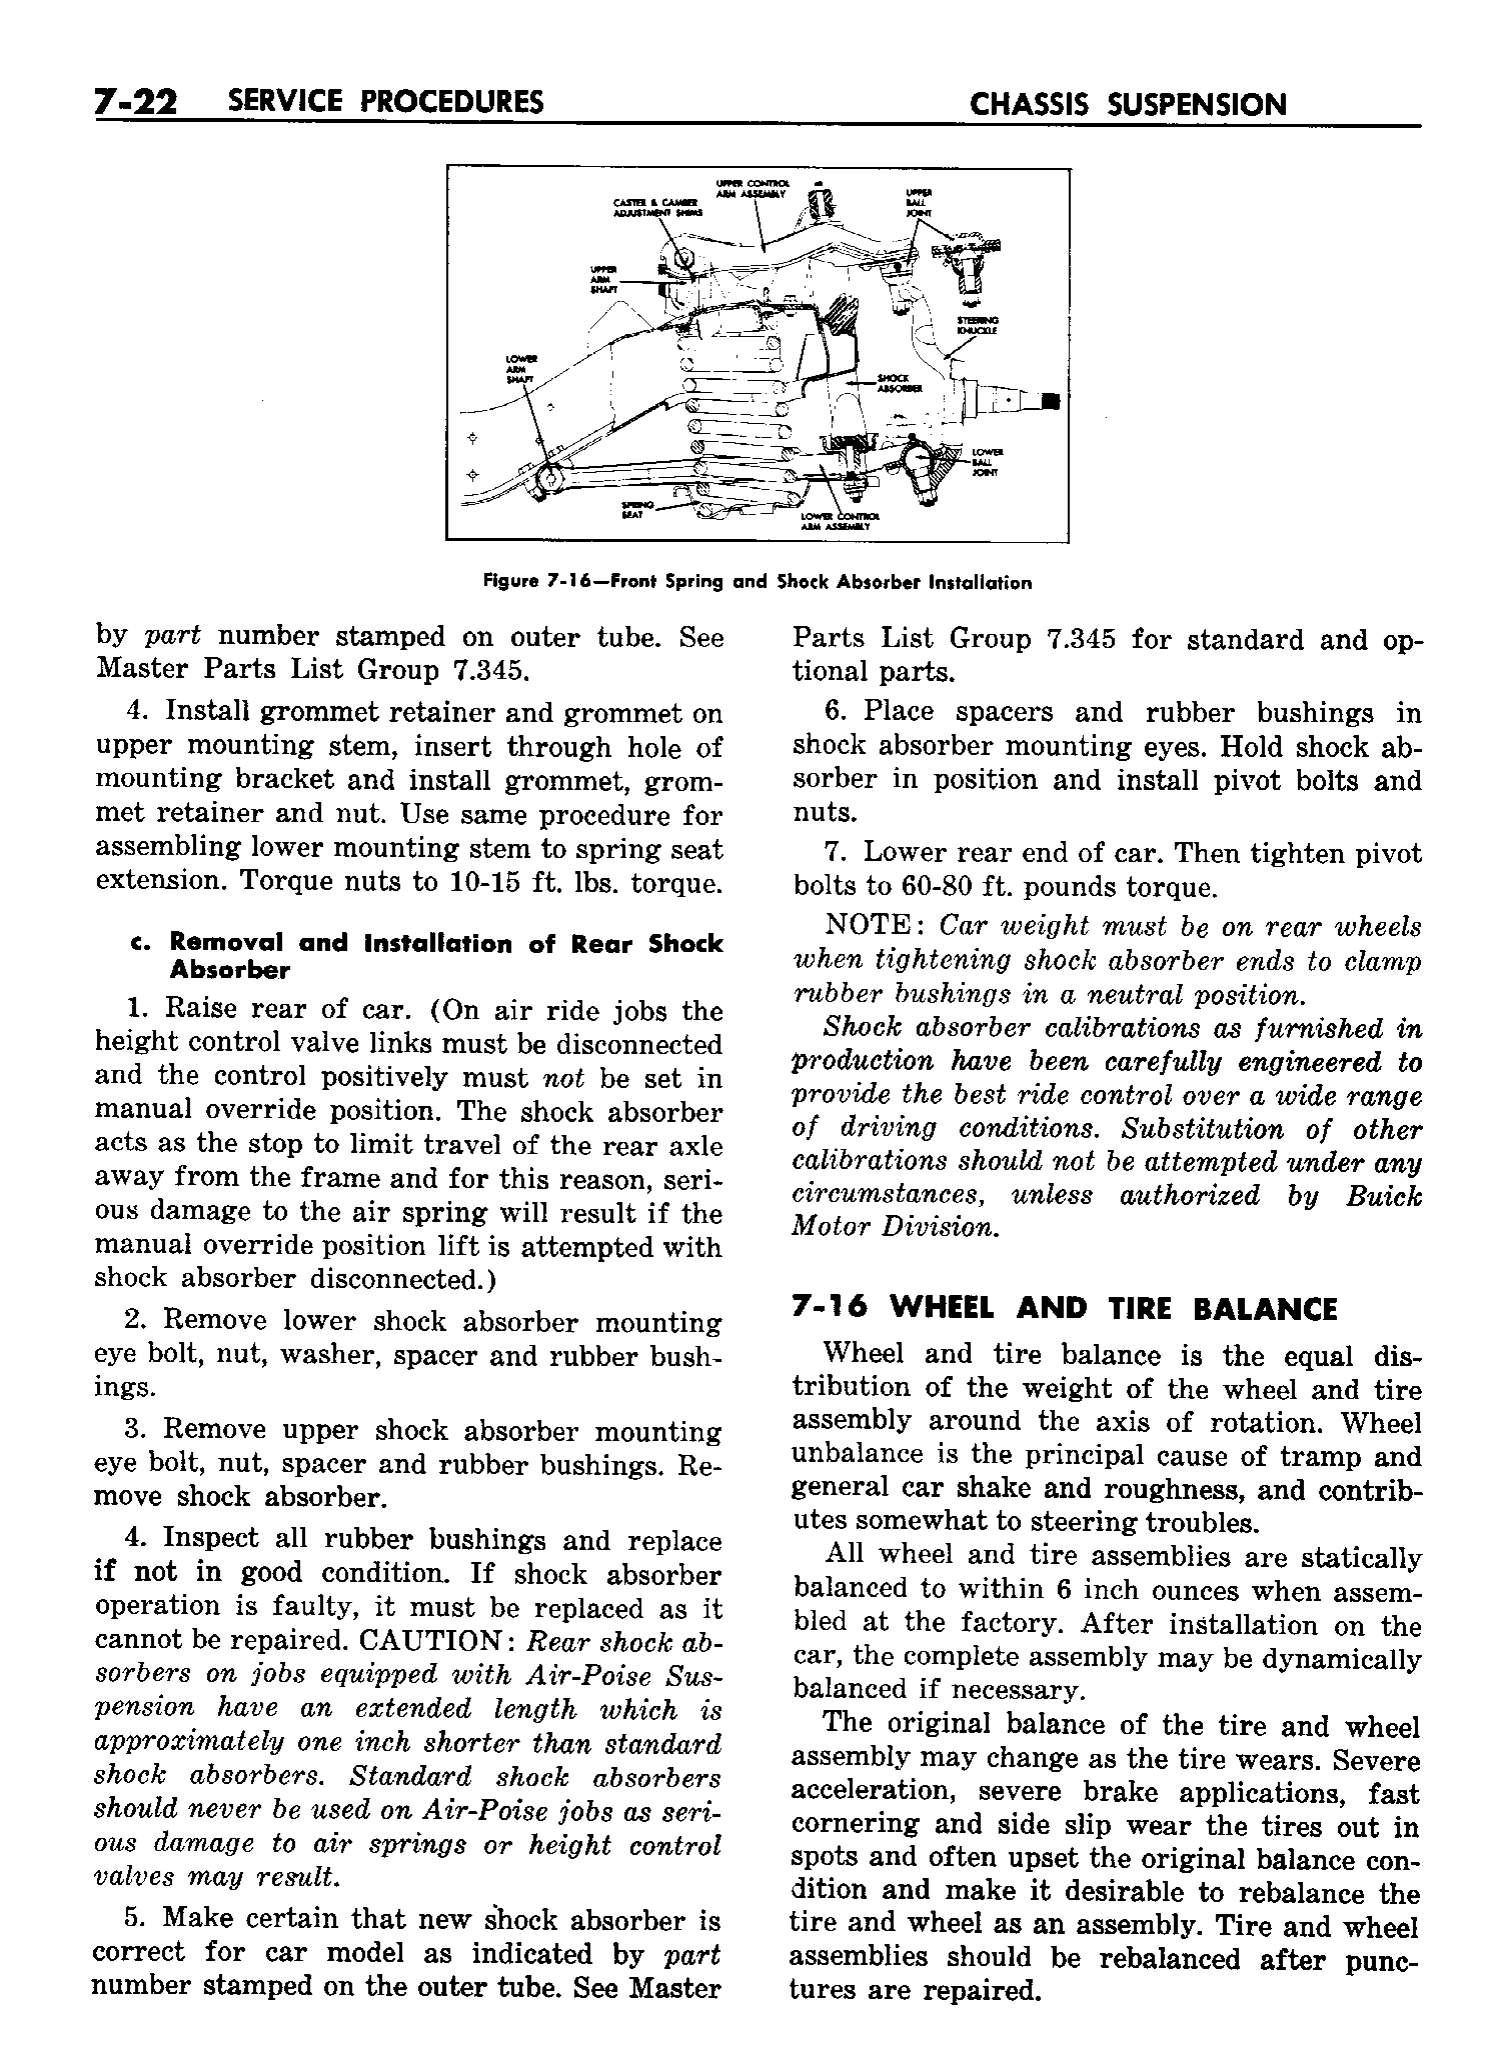 n_08 1958 Buick Shop Manual - Chassis Suspension_22.jpg